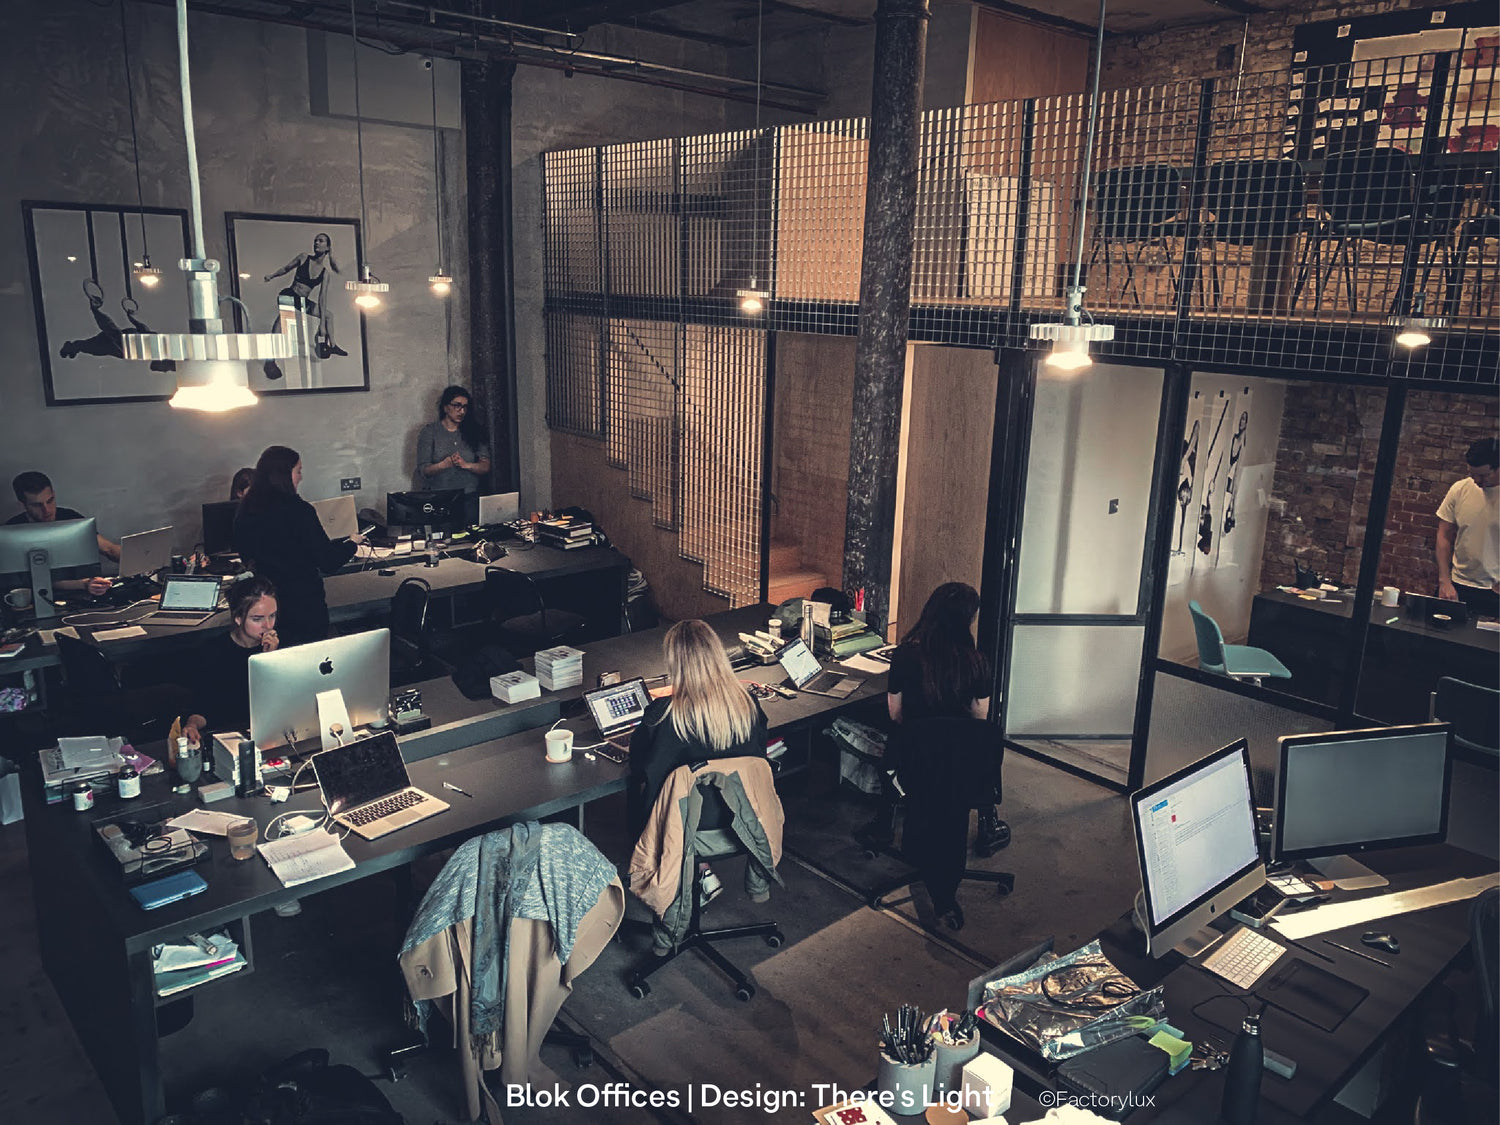 Office co-workers at desks in a industrial chic workspace interior with raw steel mesh, timber beams and open ceilings